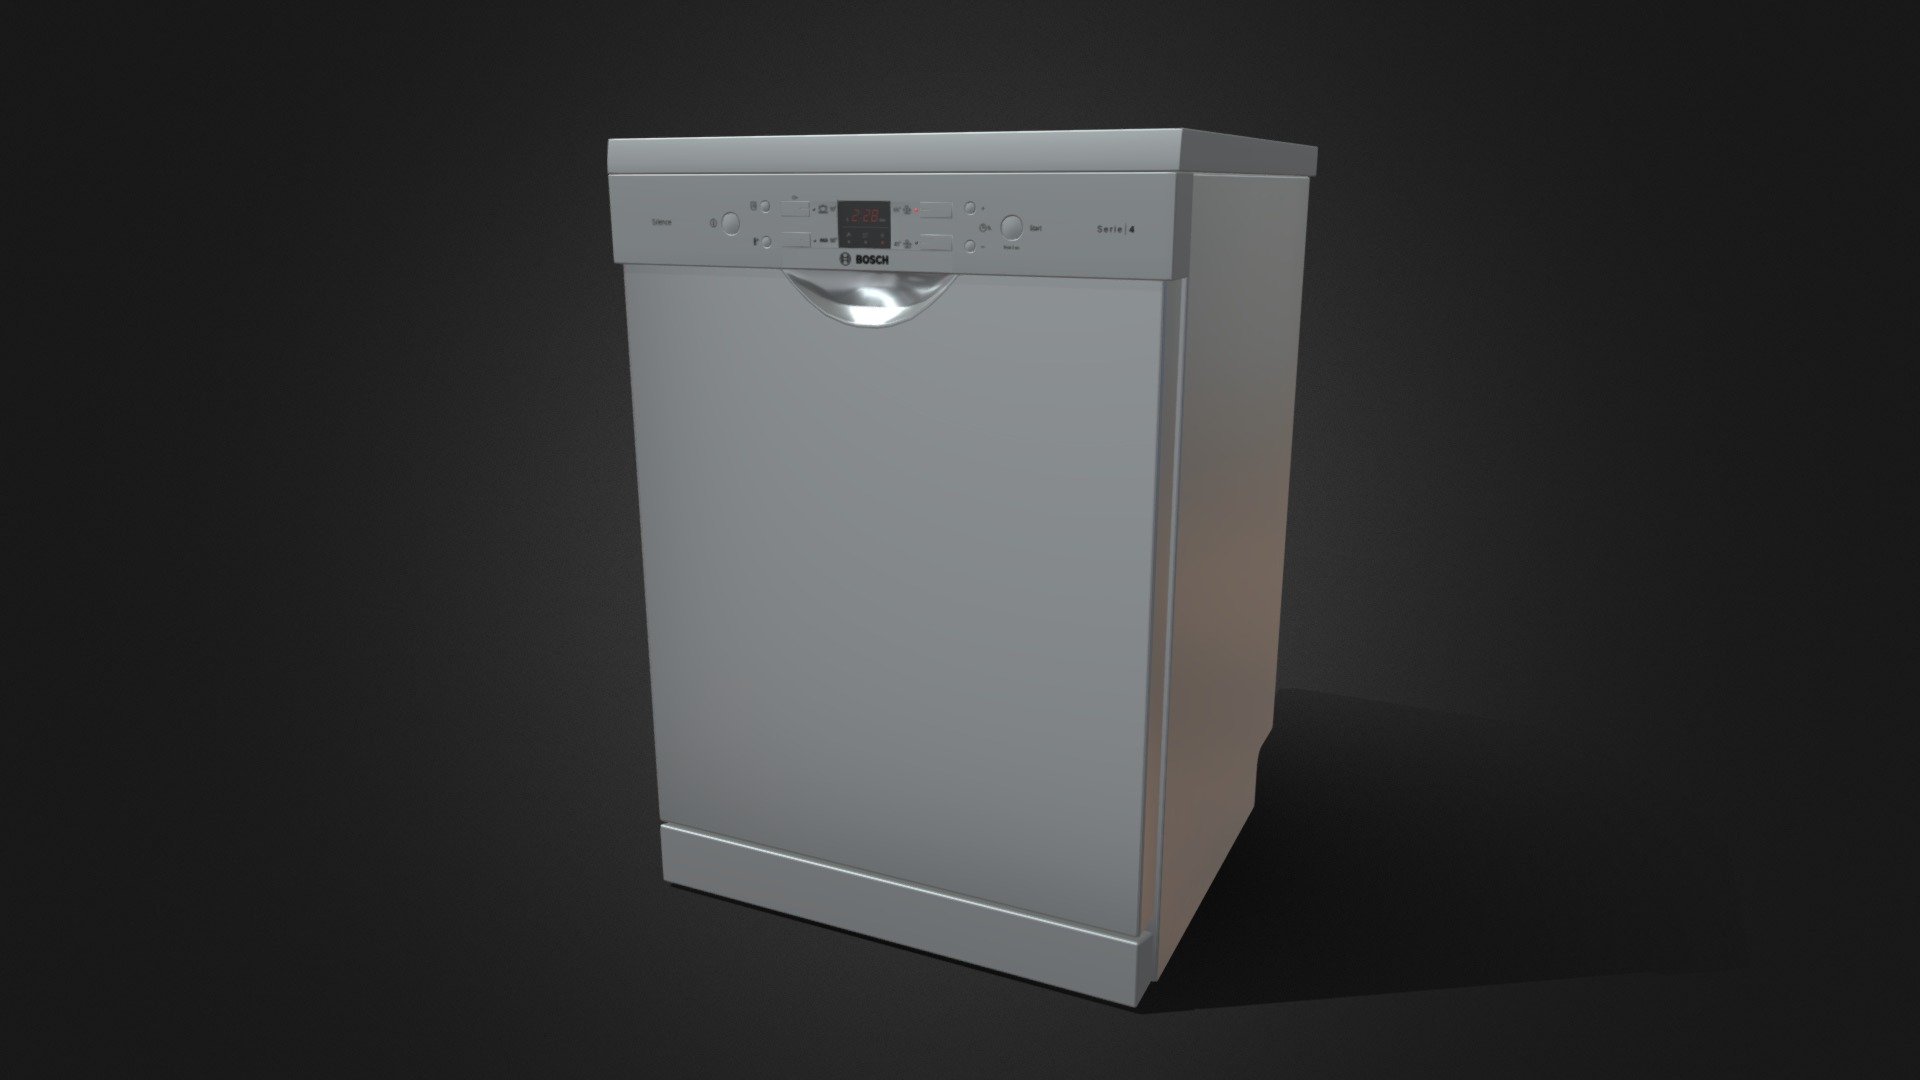 Attempting to do a realistic Bosch dishwasher - Dishwasher - 3D model by 3Dchant 3d model